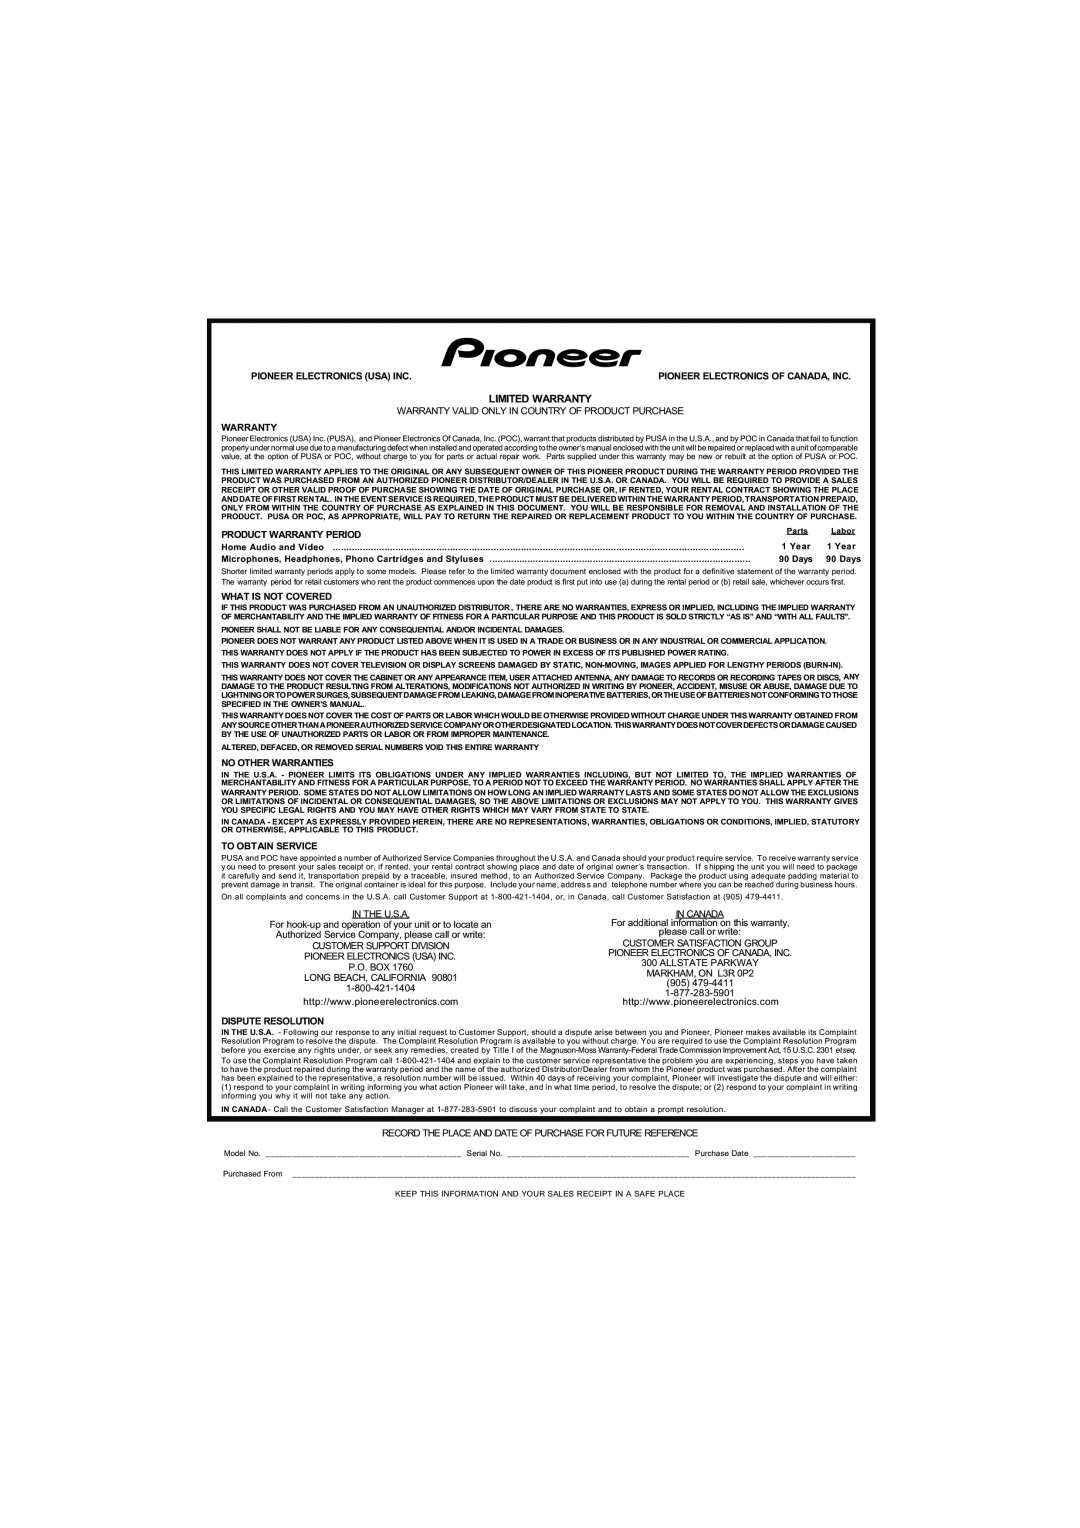 Pioneer XRE3138-A manual Limited Warranty, Pioneer Electronics Usa Inc, Product Warranty Period, What Is Not Covered 